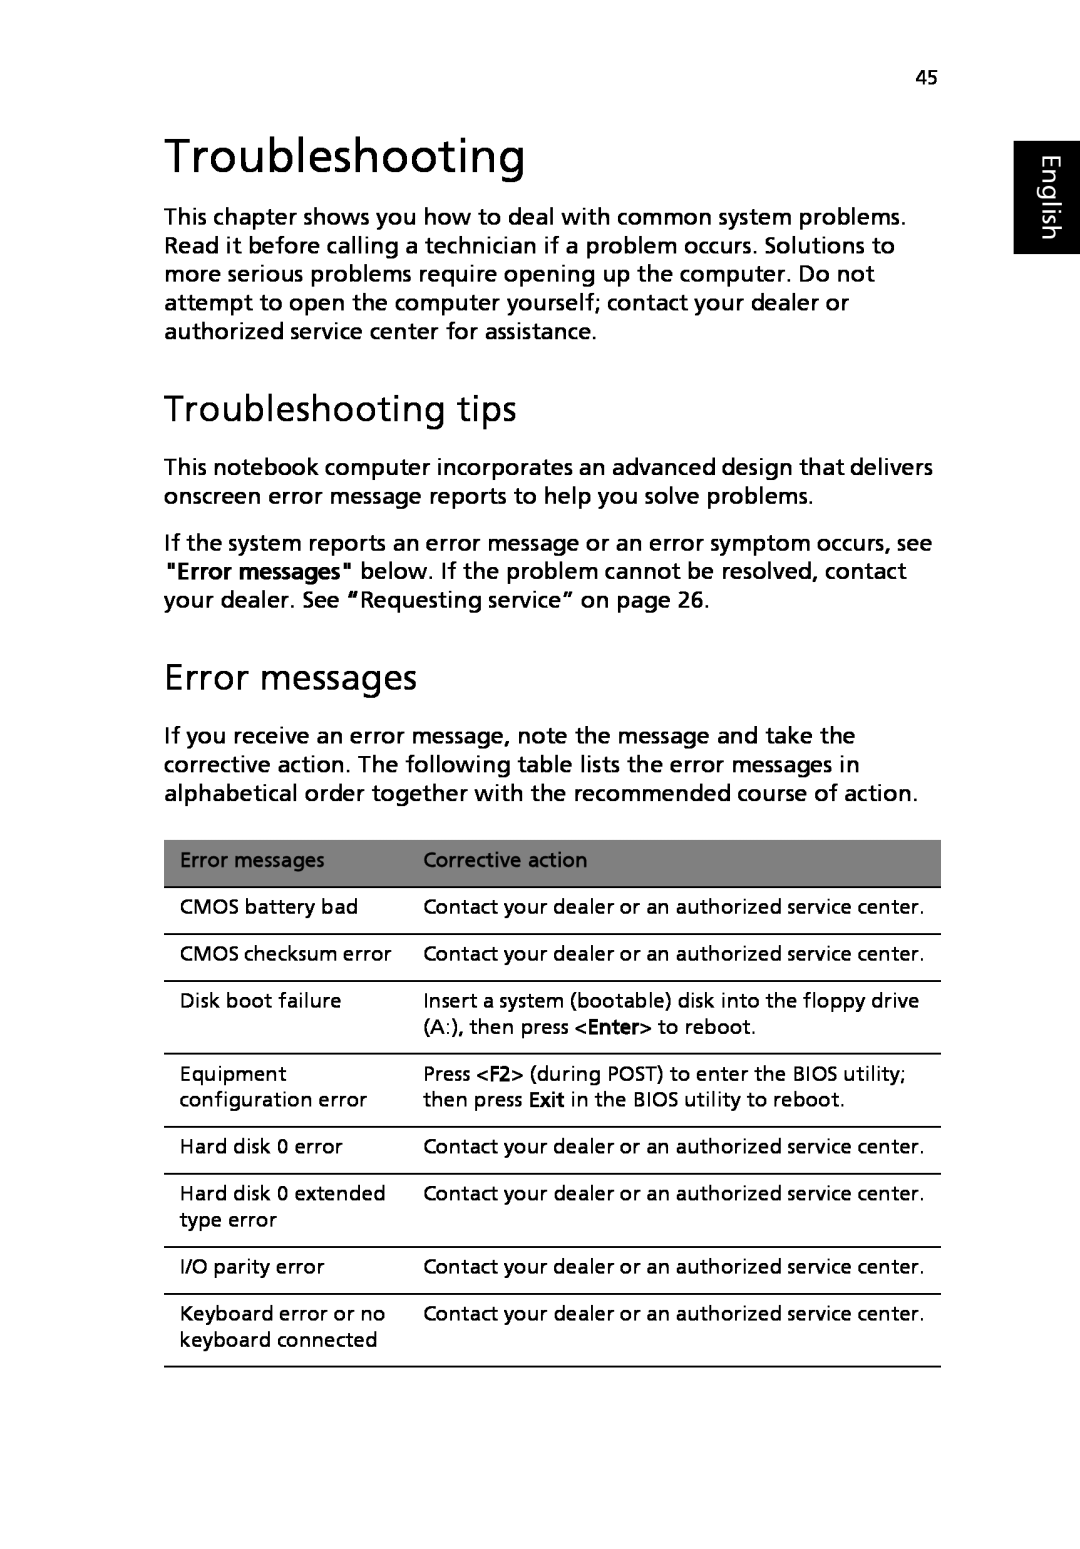 Acer 2310 Series manual Troubleshooting tips, Error messages, English 